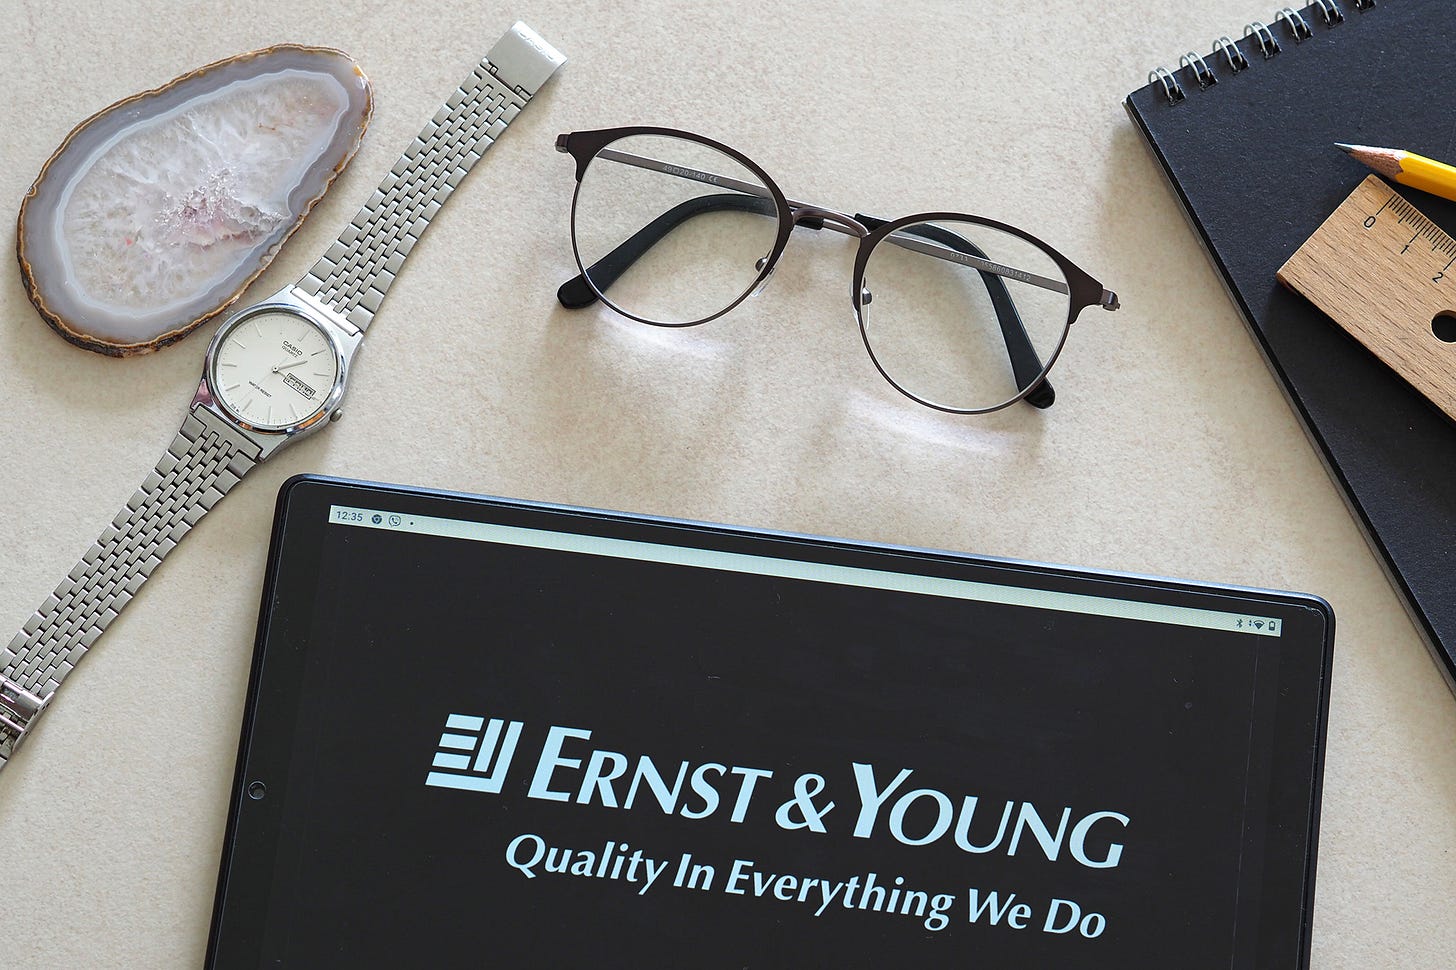 Ernst & Young admits CPAs cheated on ethics exams, will pay $100M fine